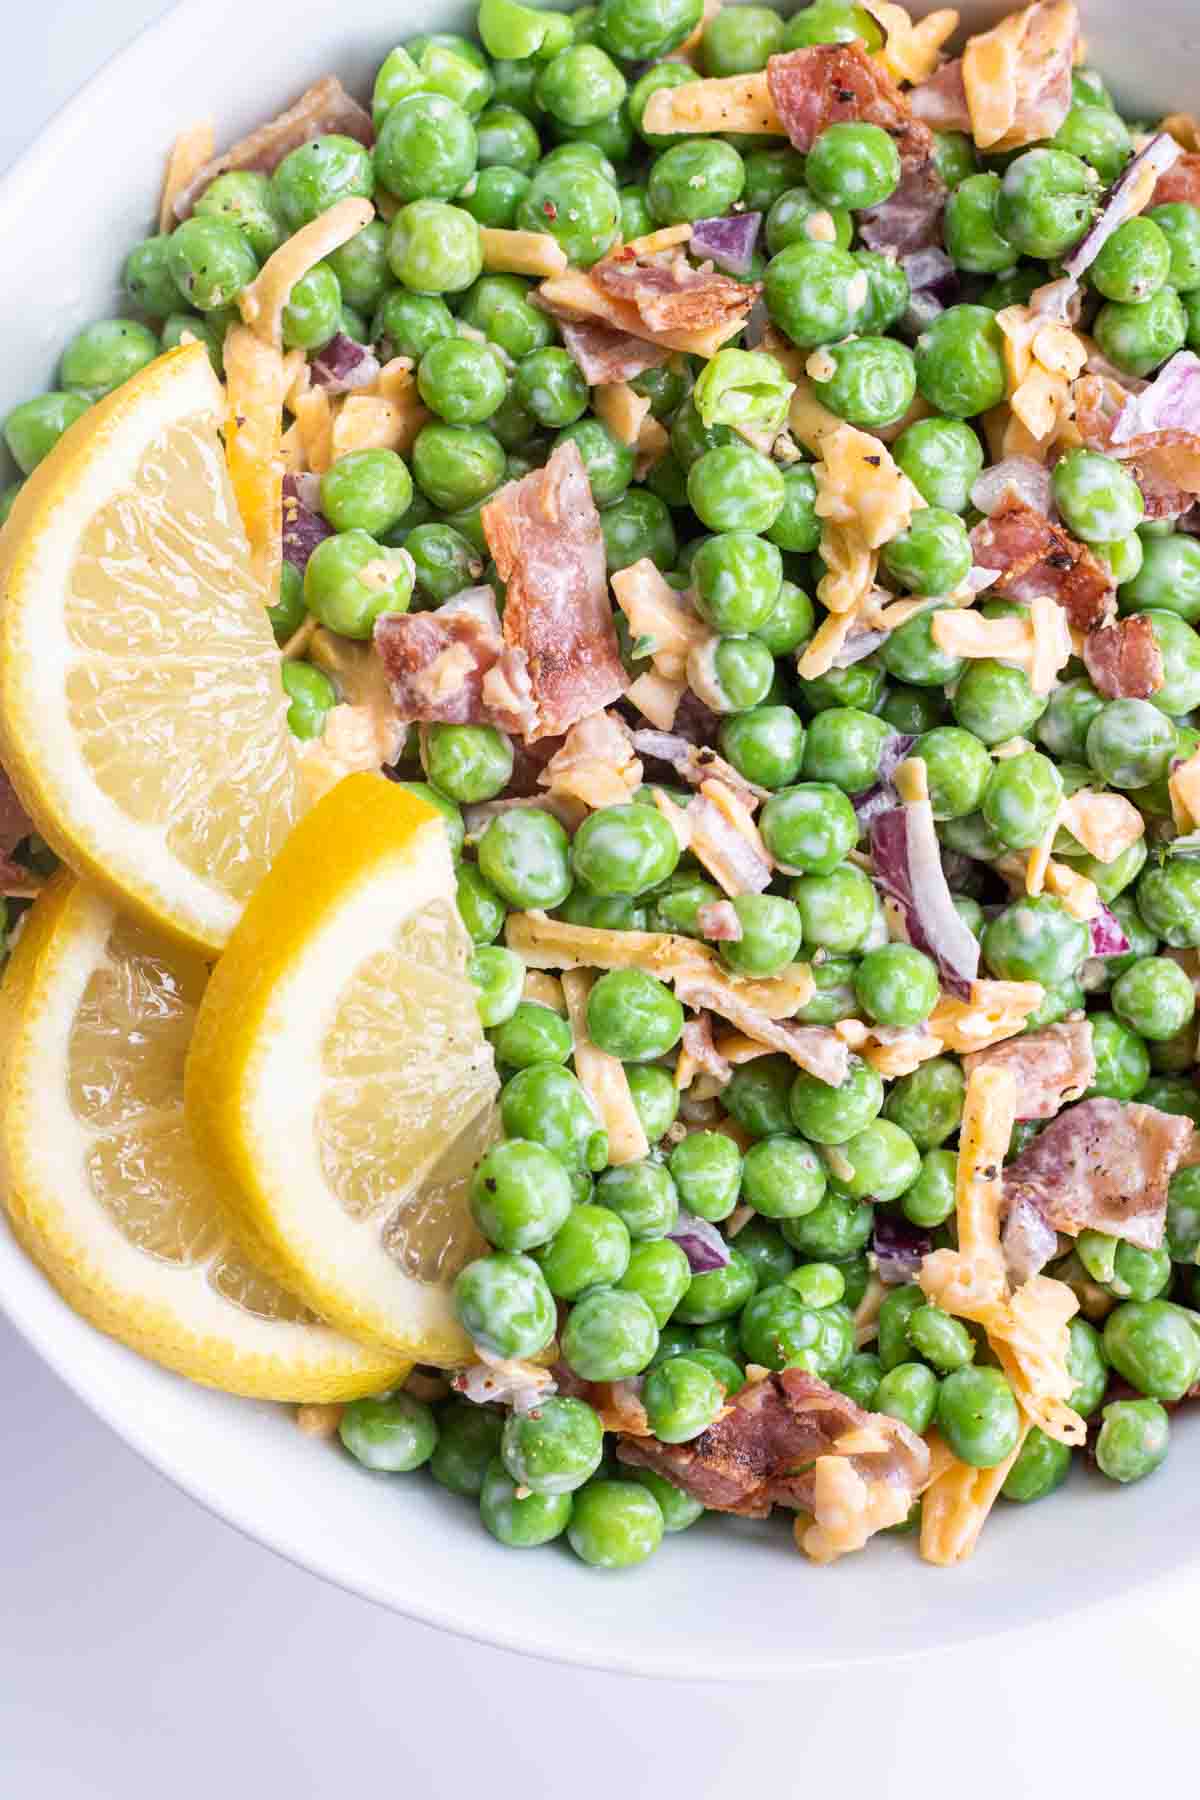 english pea salad in a white bowl with lemon slices